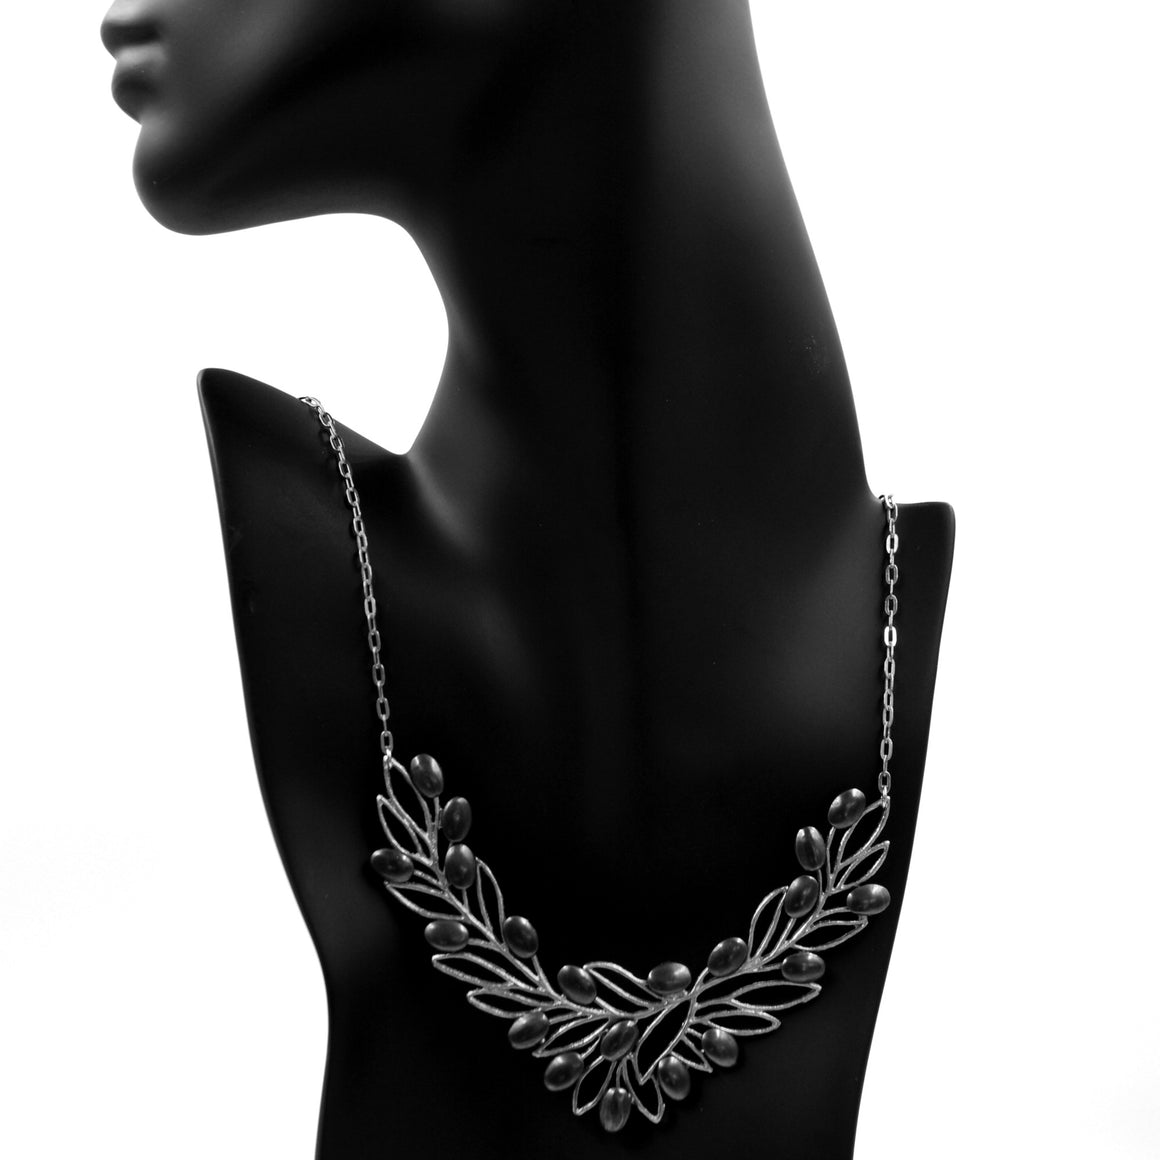 Olive Branch Olives and Leaves Collar Necklace - Platinum Silver